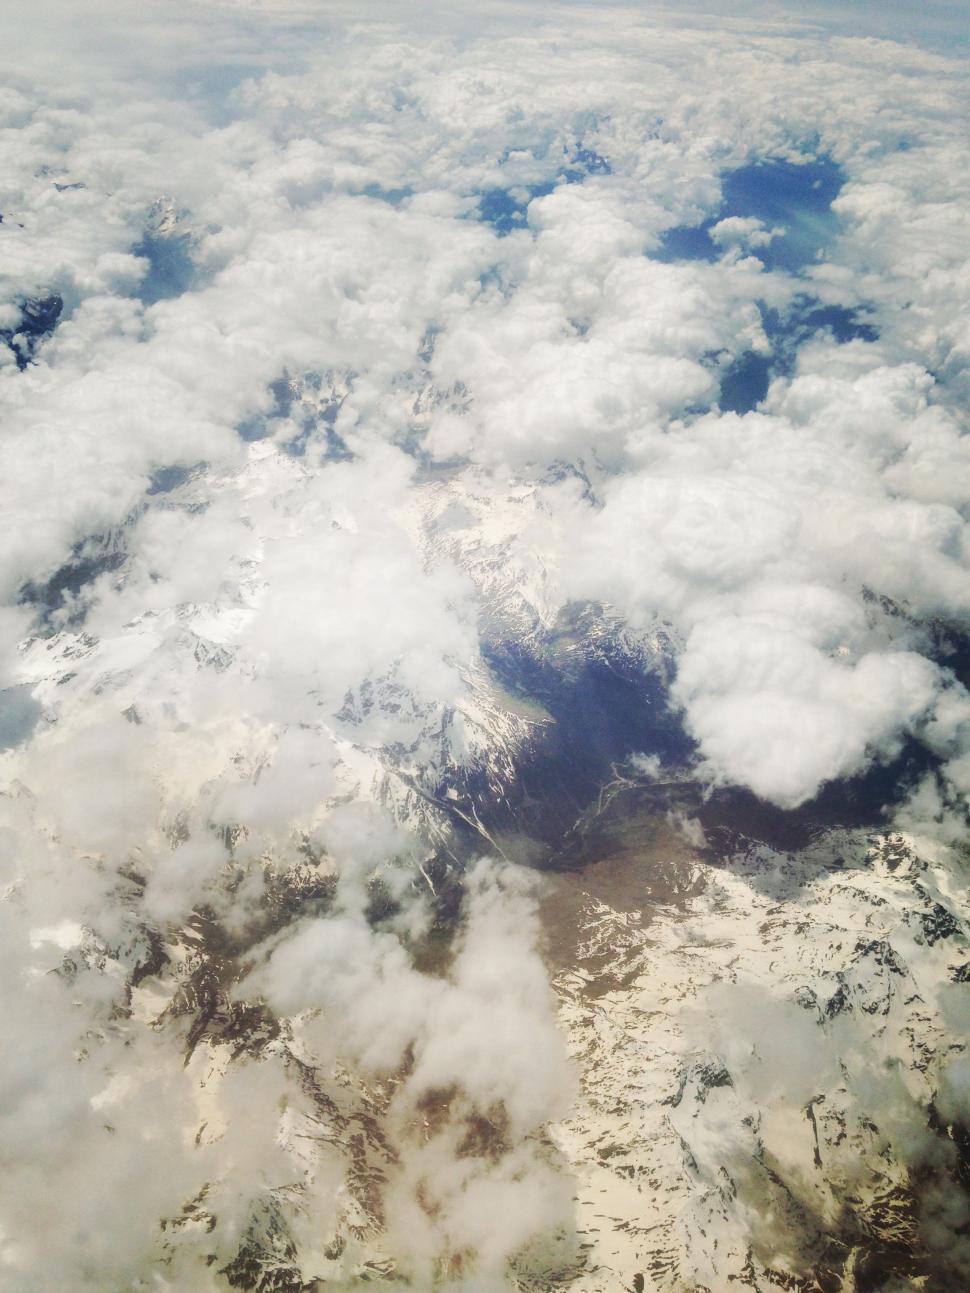 Free Image of A View of the Clouds From an Airplane 